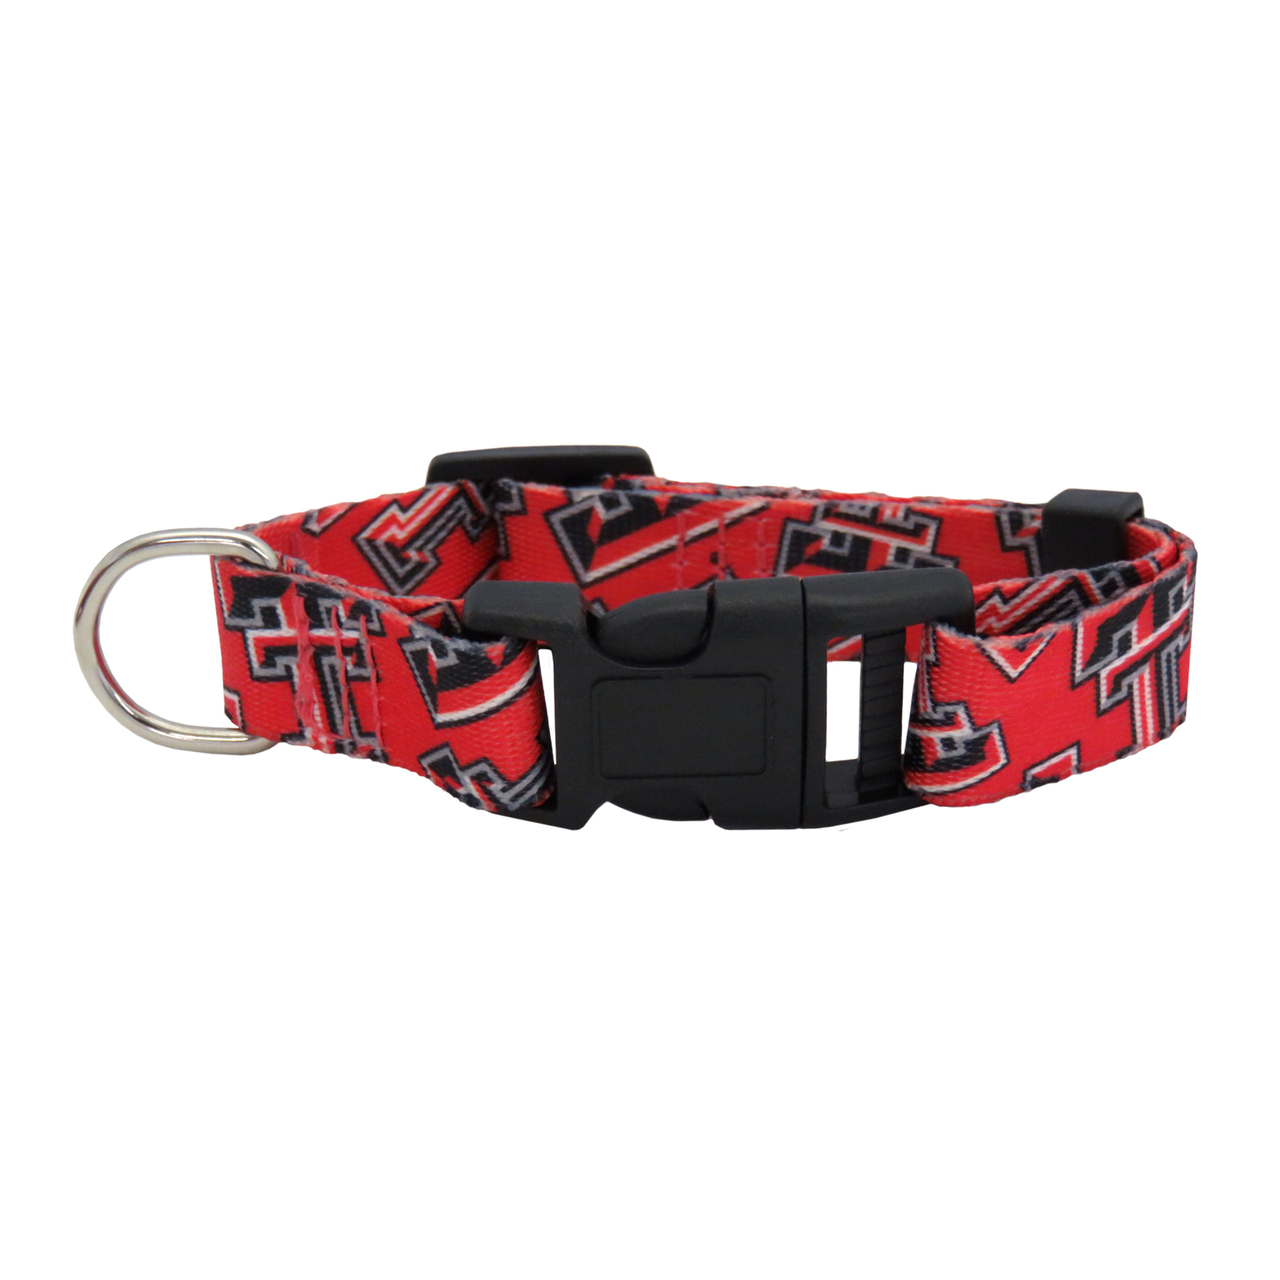 Texas Tech Red Raiders Pet Collar Size M - Special Order